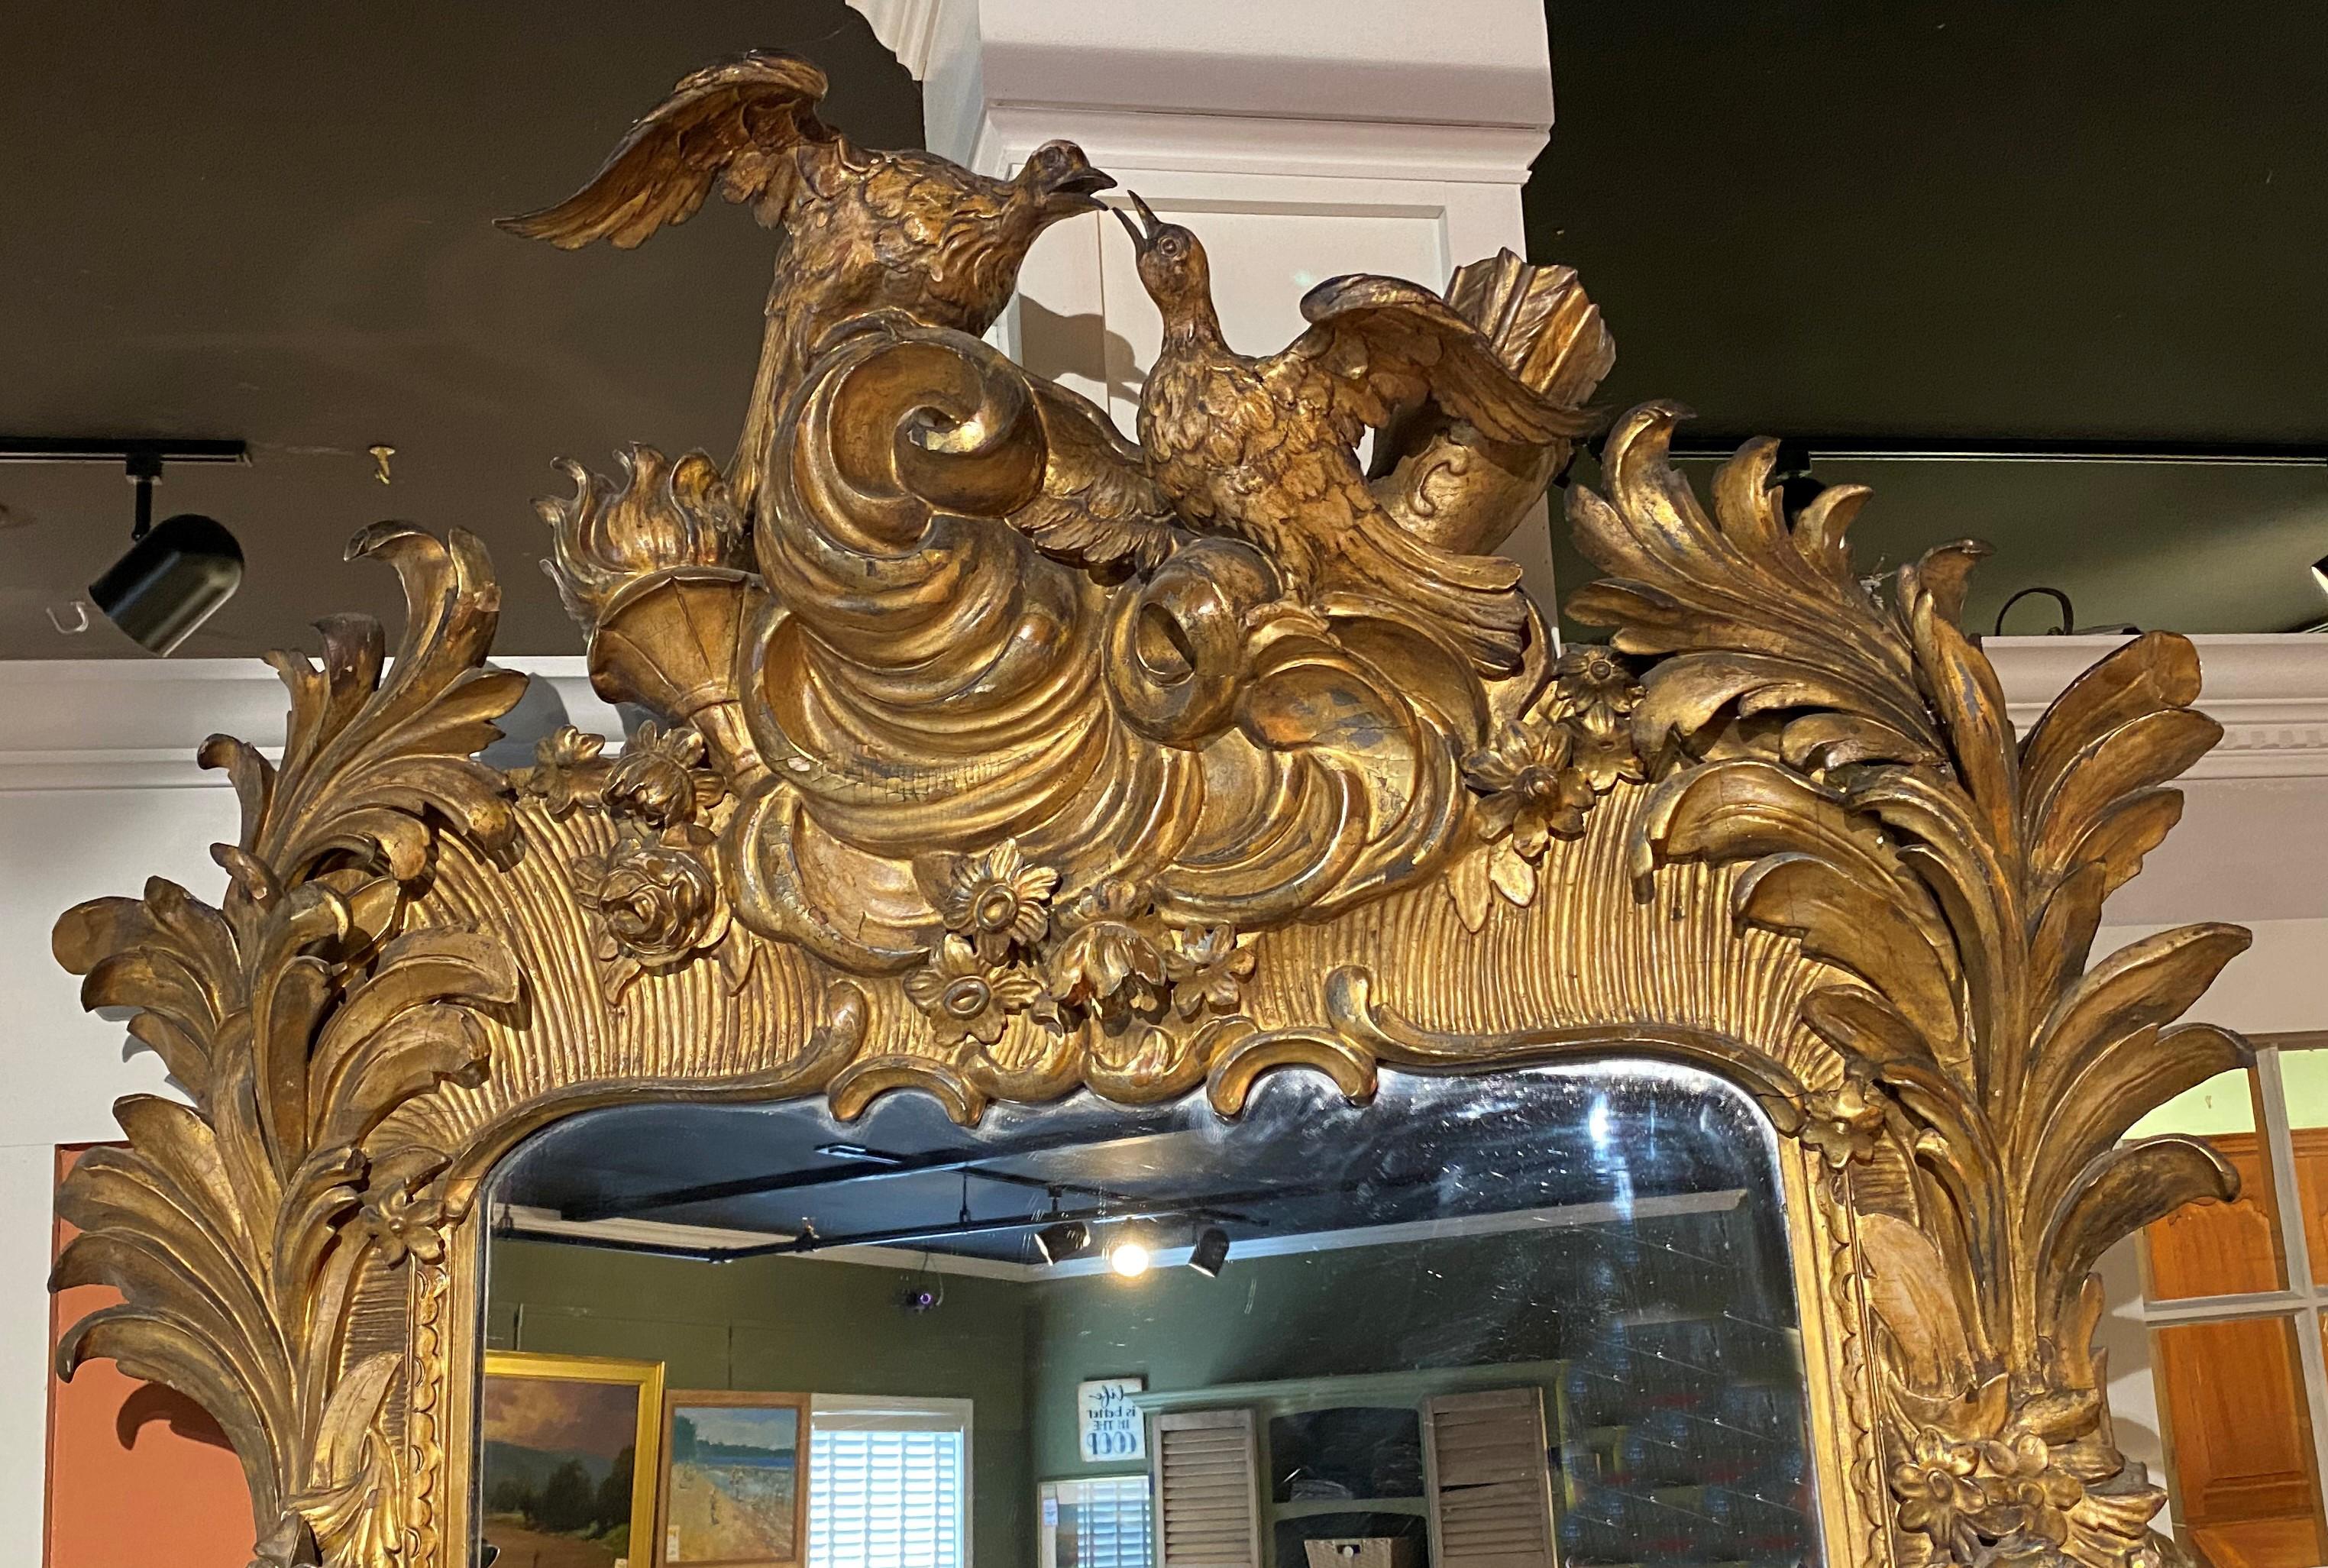 A spectacular Italian carved and giltwood Rococo rectangular pier mirror with an exceptional foliate carved frame and crest featuring two birds, a quiver with arrows, a flame torch, and large scrollwork accents. Comes with a matching giltwood